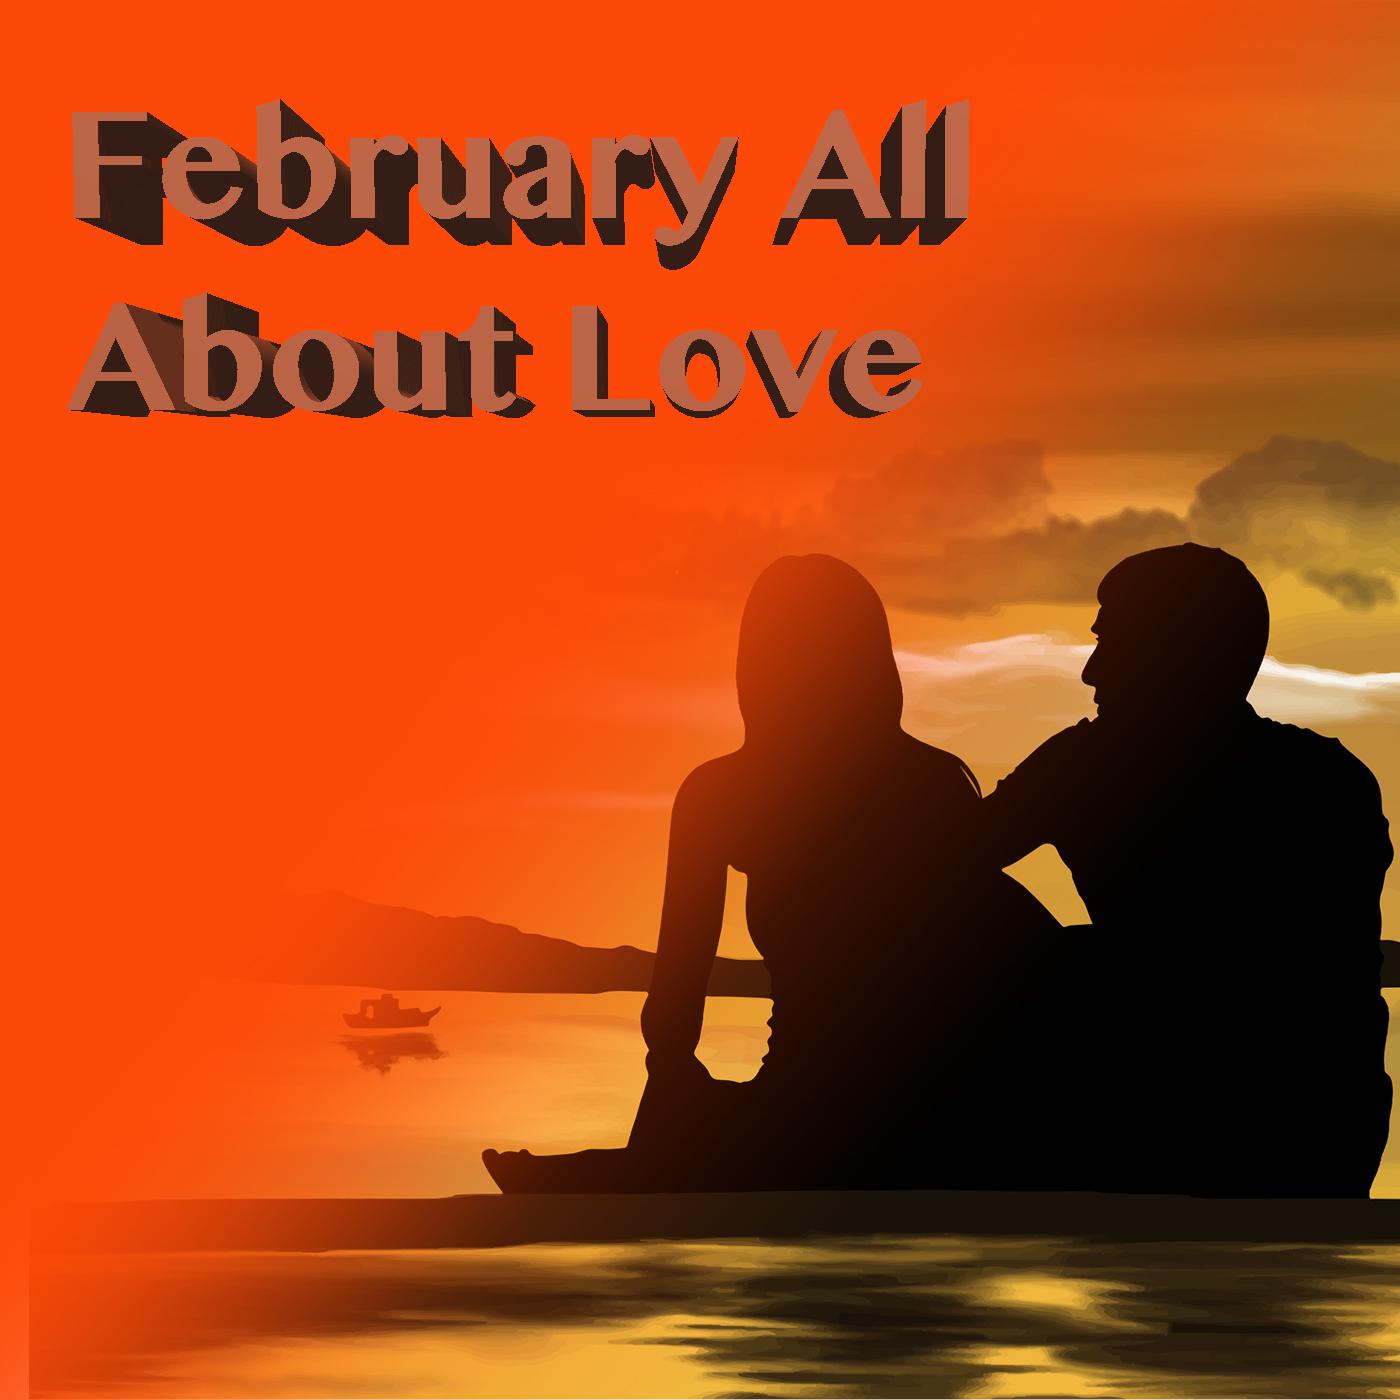 February All About Love